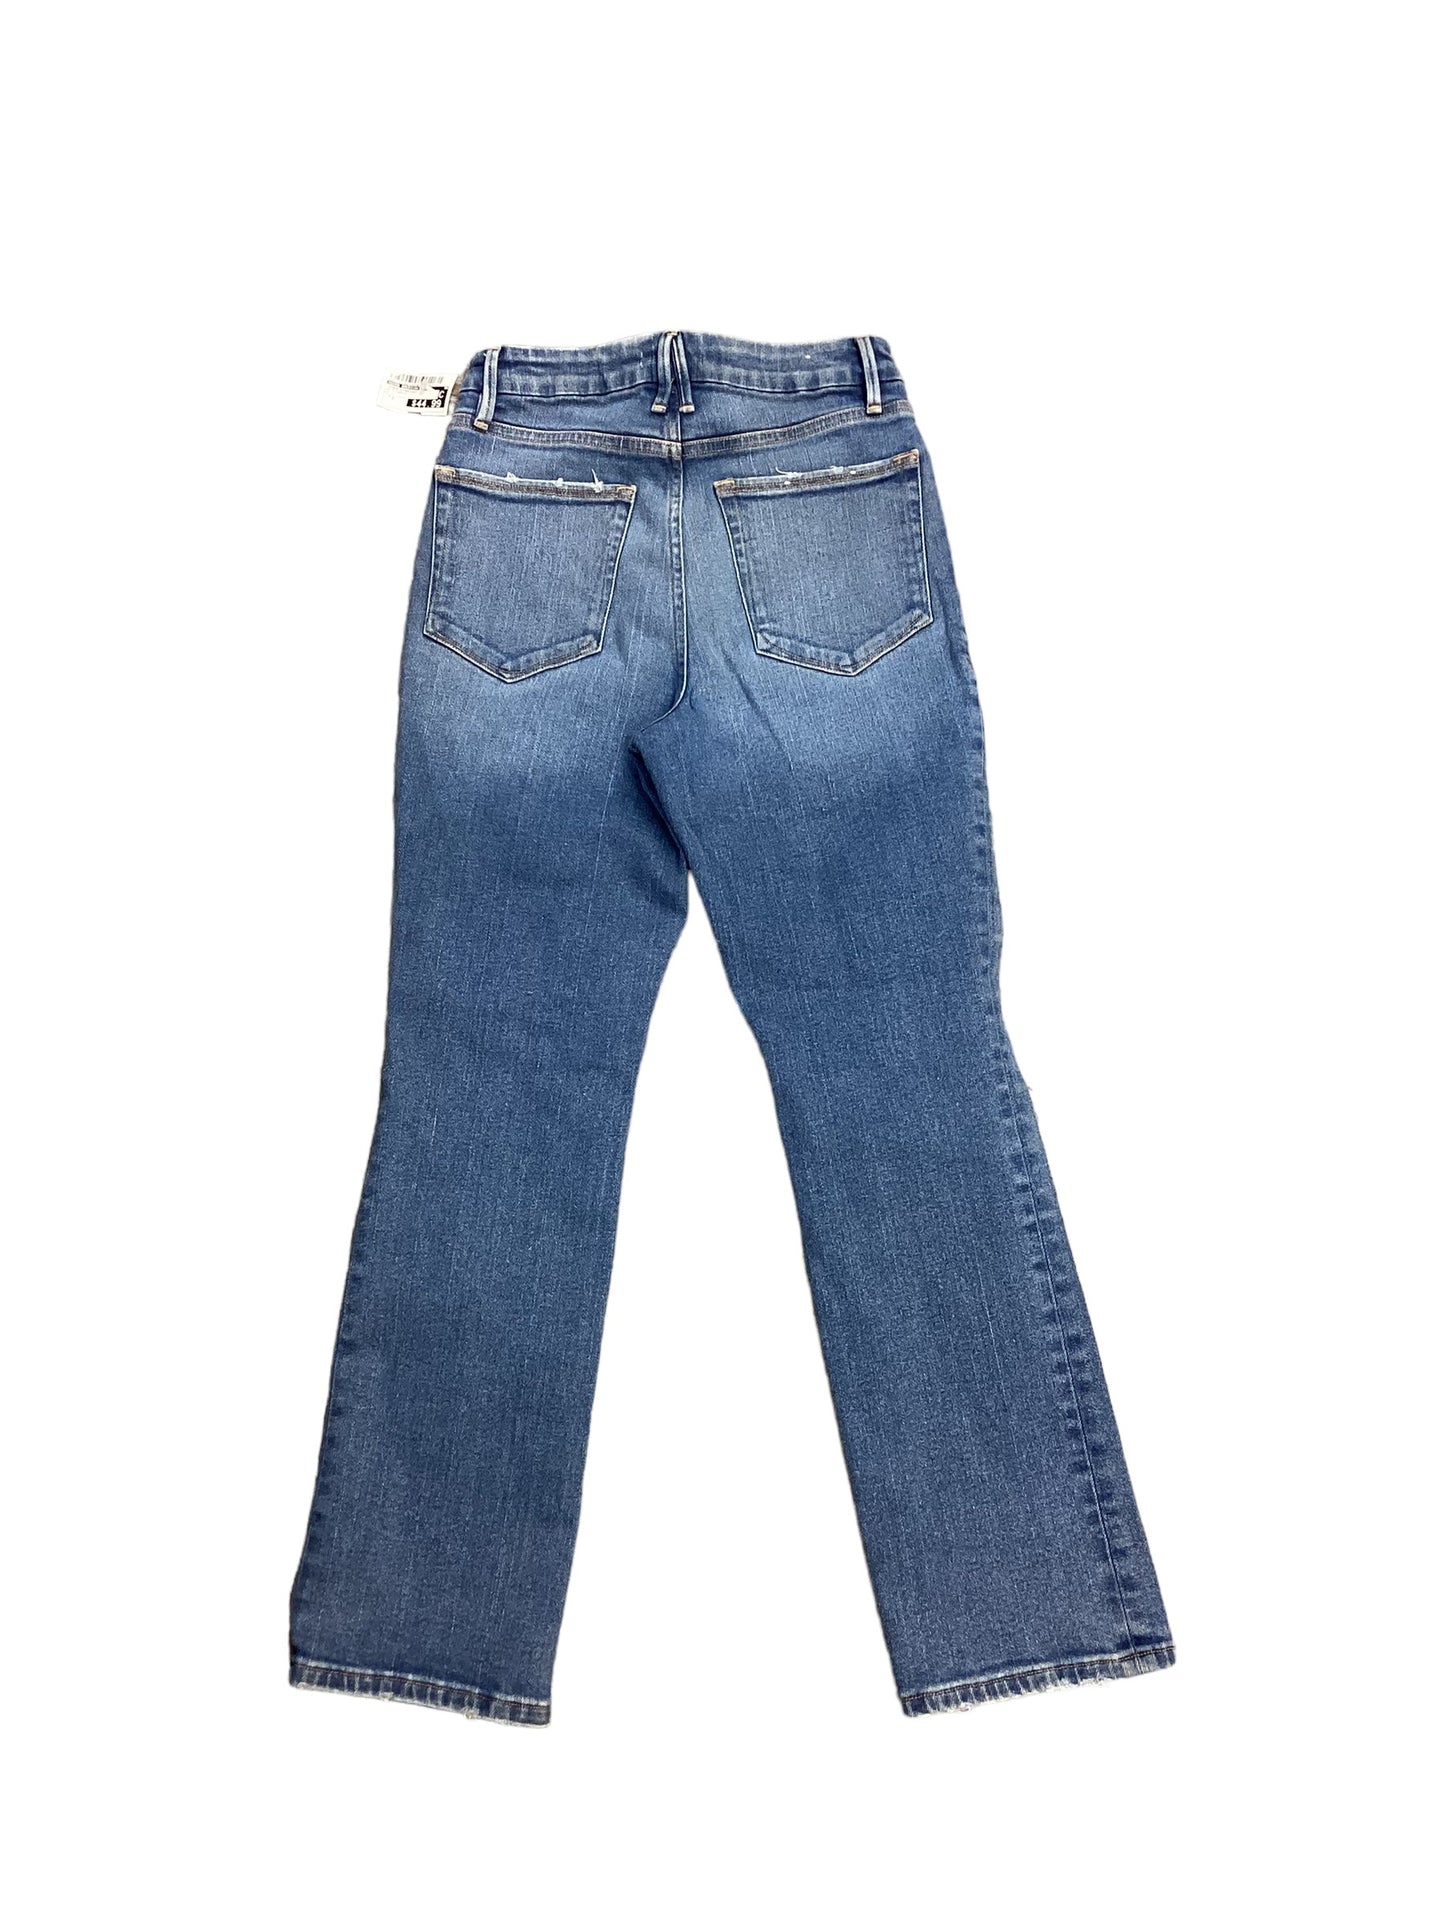 Jeans Straight By Good American  Size: 2